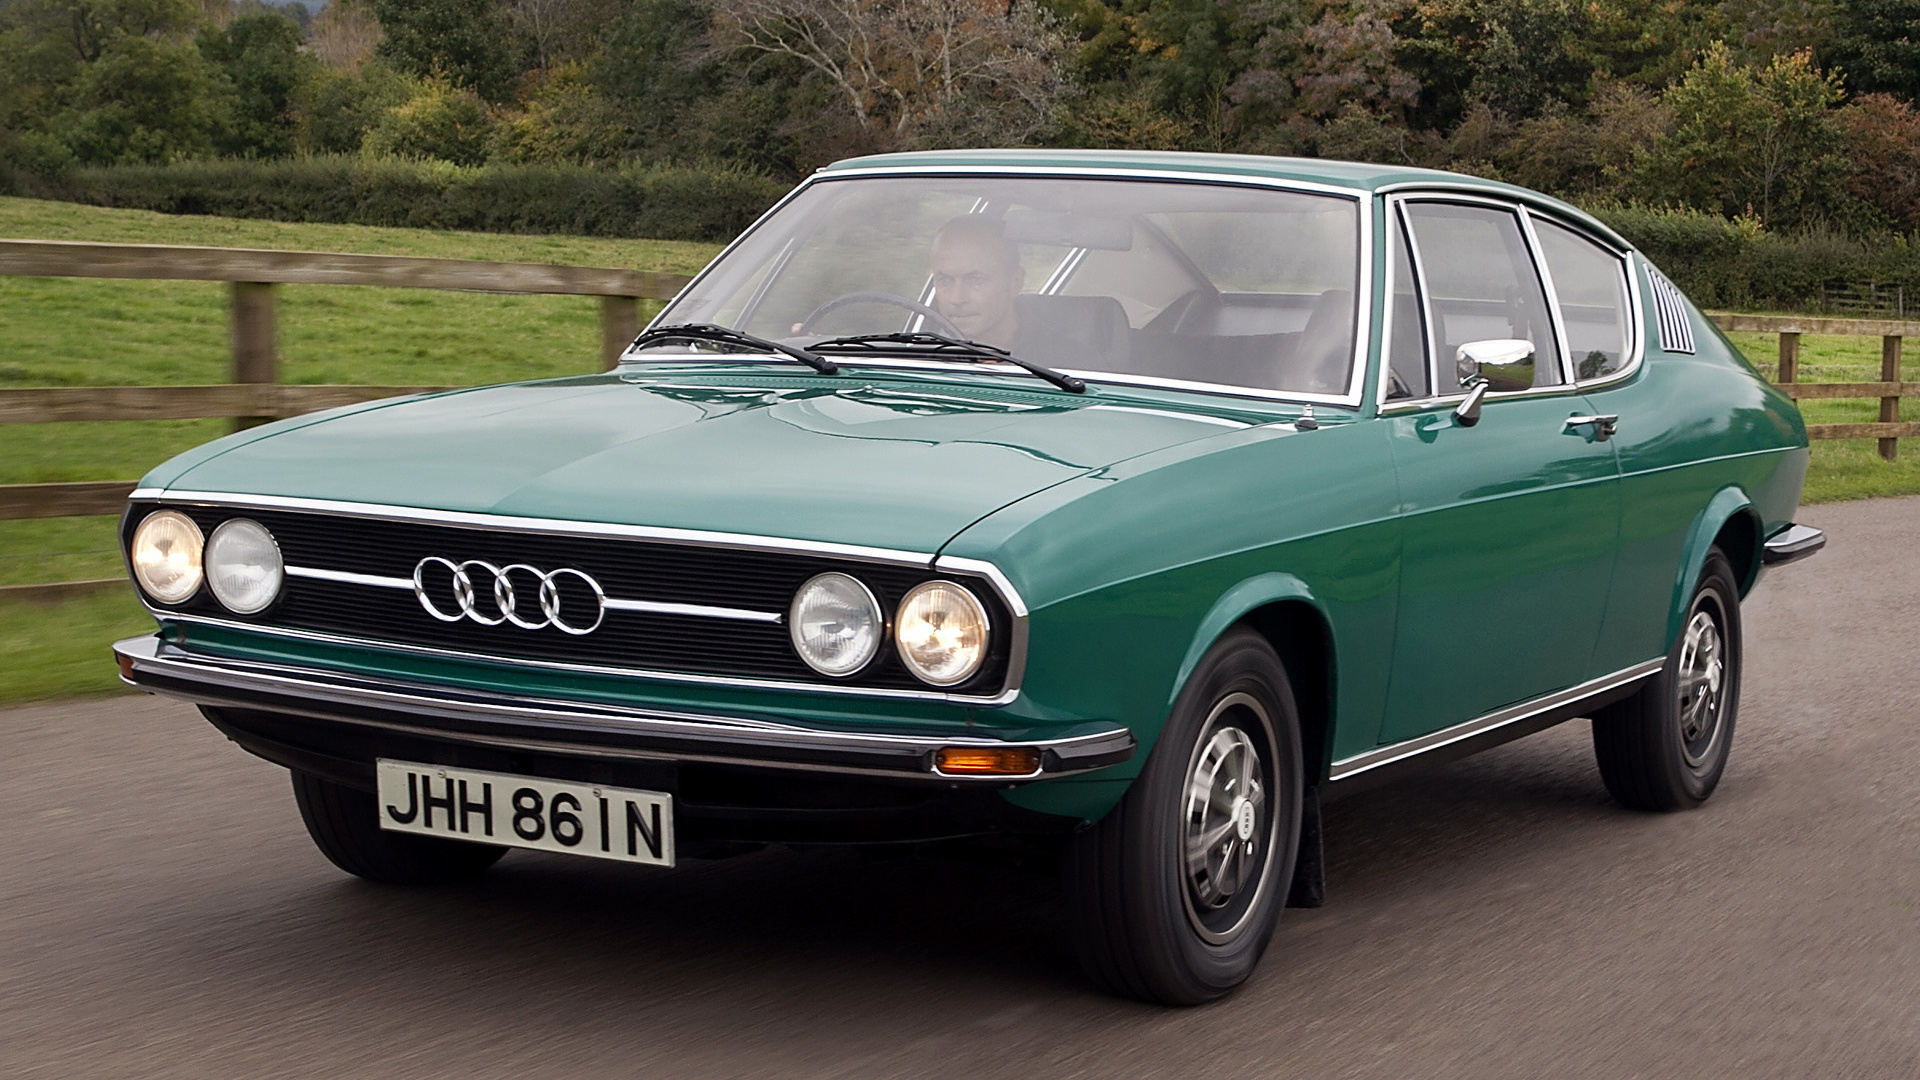 1973 Audi 100 Coupe S (UK) - Wallpapers and HD Images | Car Pixel